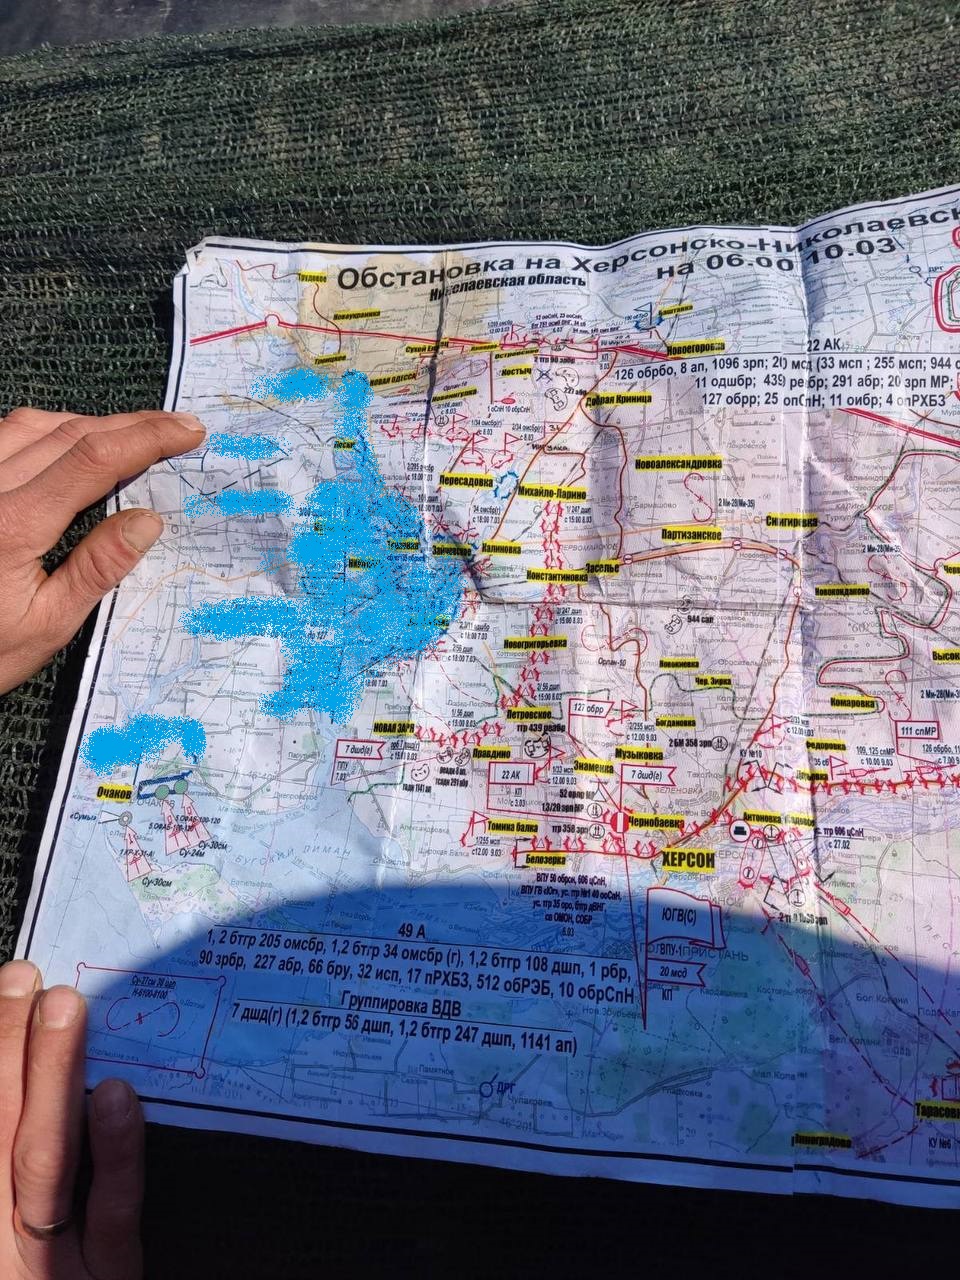 Ukrainian Forces have Seized Russian Staff Map of the Southern Front: the Data Revealed Explains the